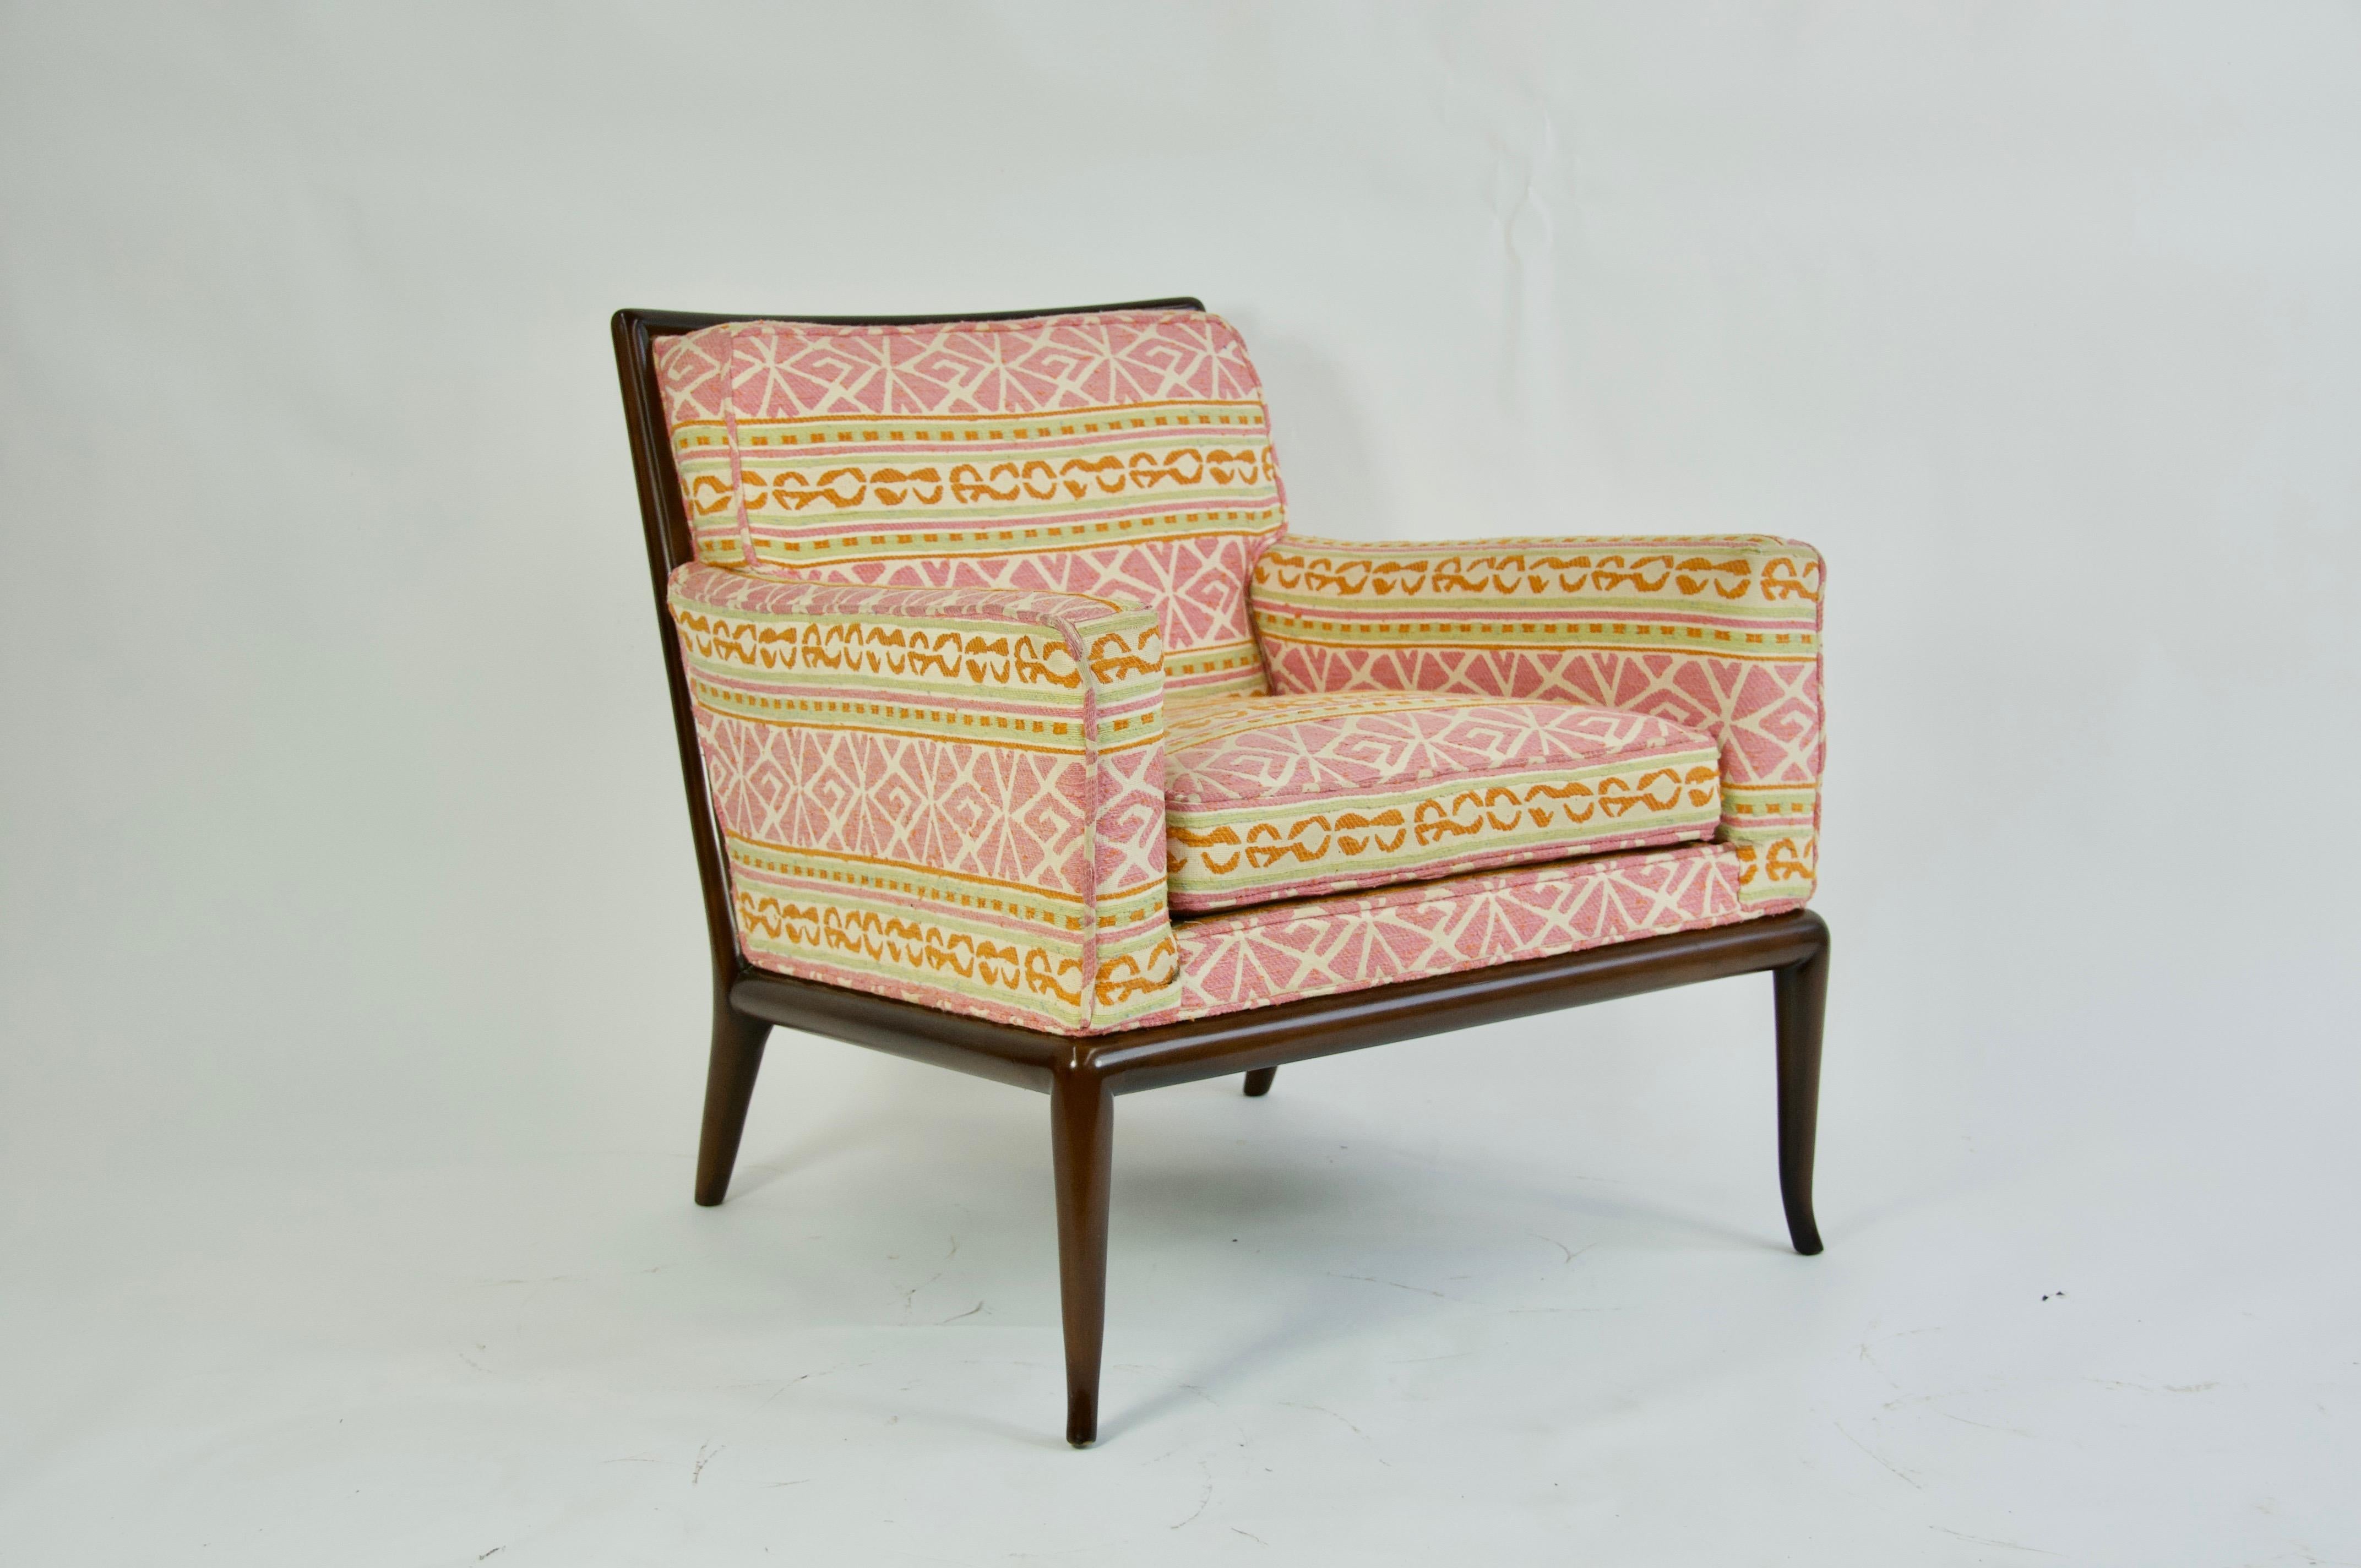 Lounge chair by T.H. Robsjohn-Gibbings. Vintage upholstery. 
The frame of this chair has recently been refinished and is darker than the main image.